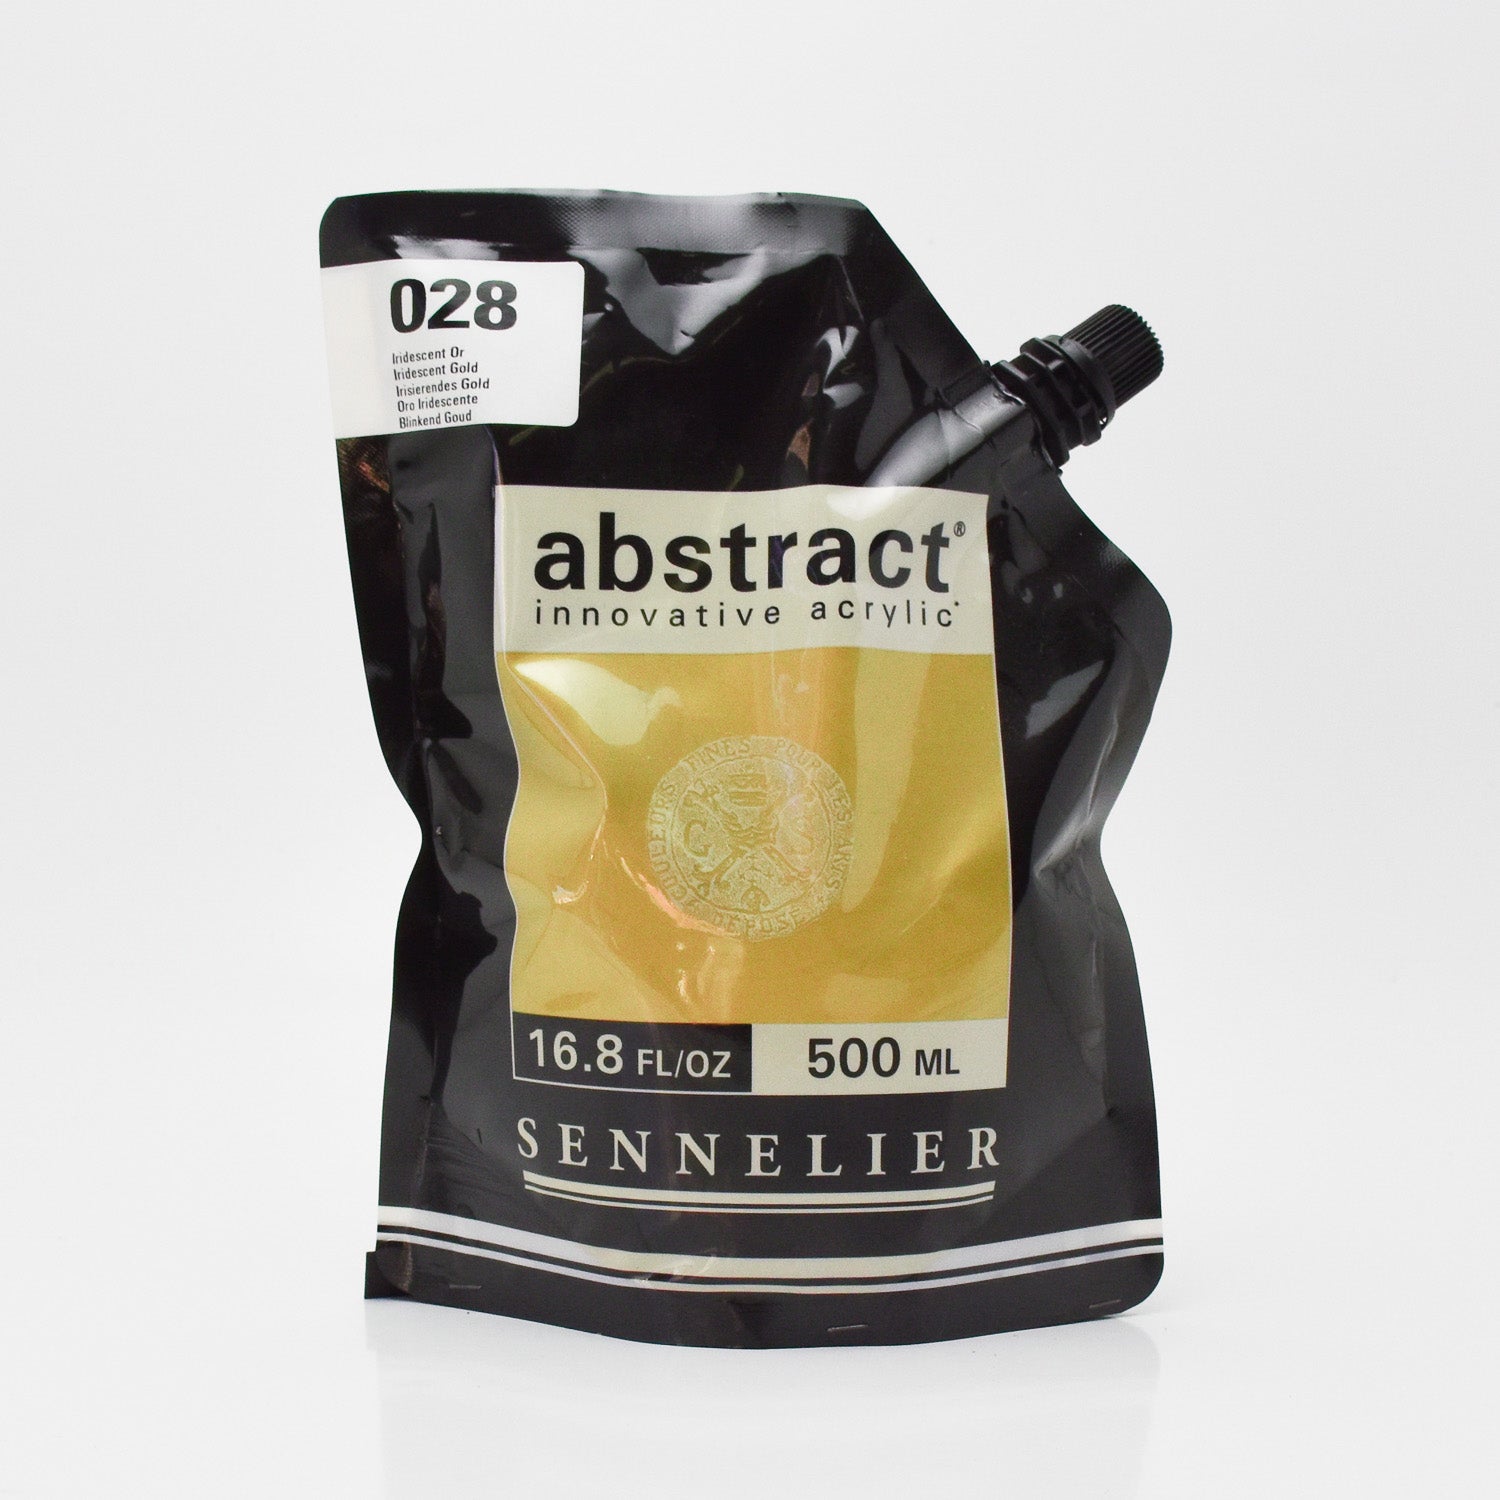 Sennelier Abstract Acrylic Satin 500ml - Melbourne Etching Supplies